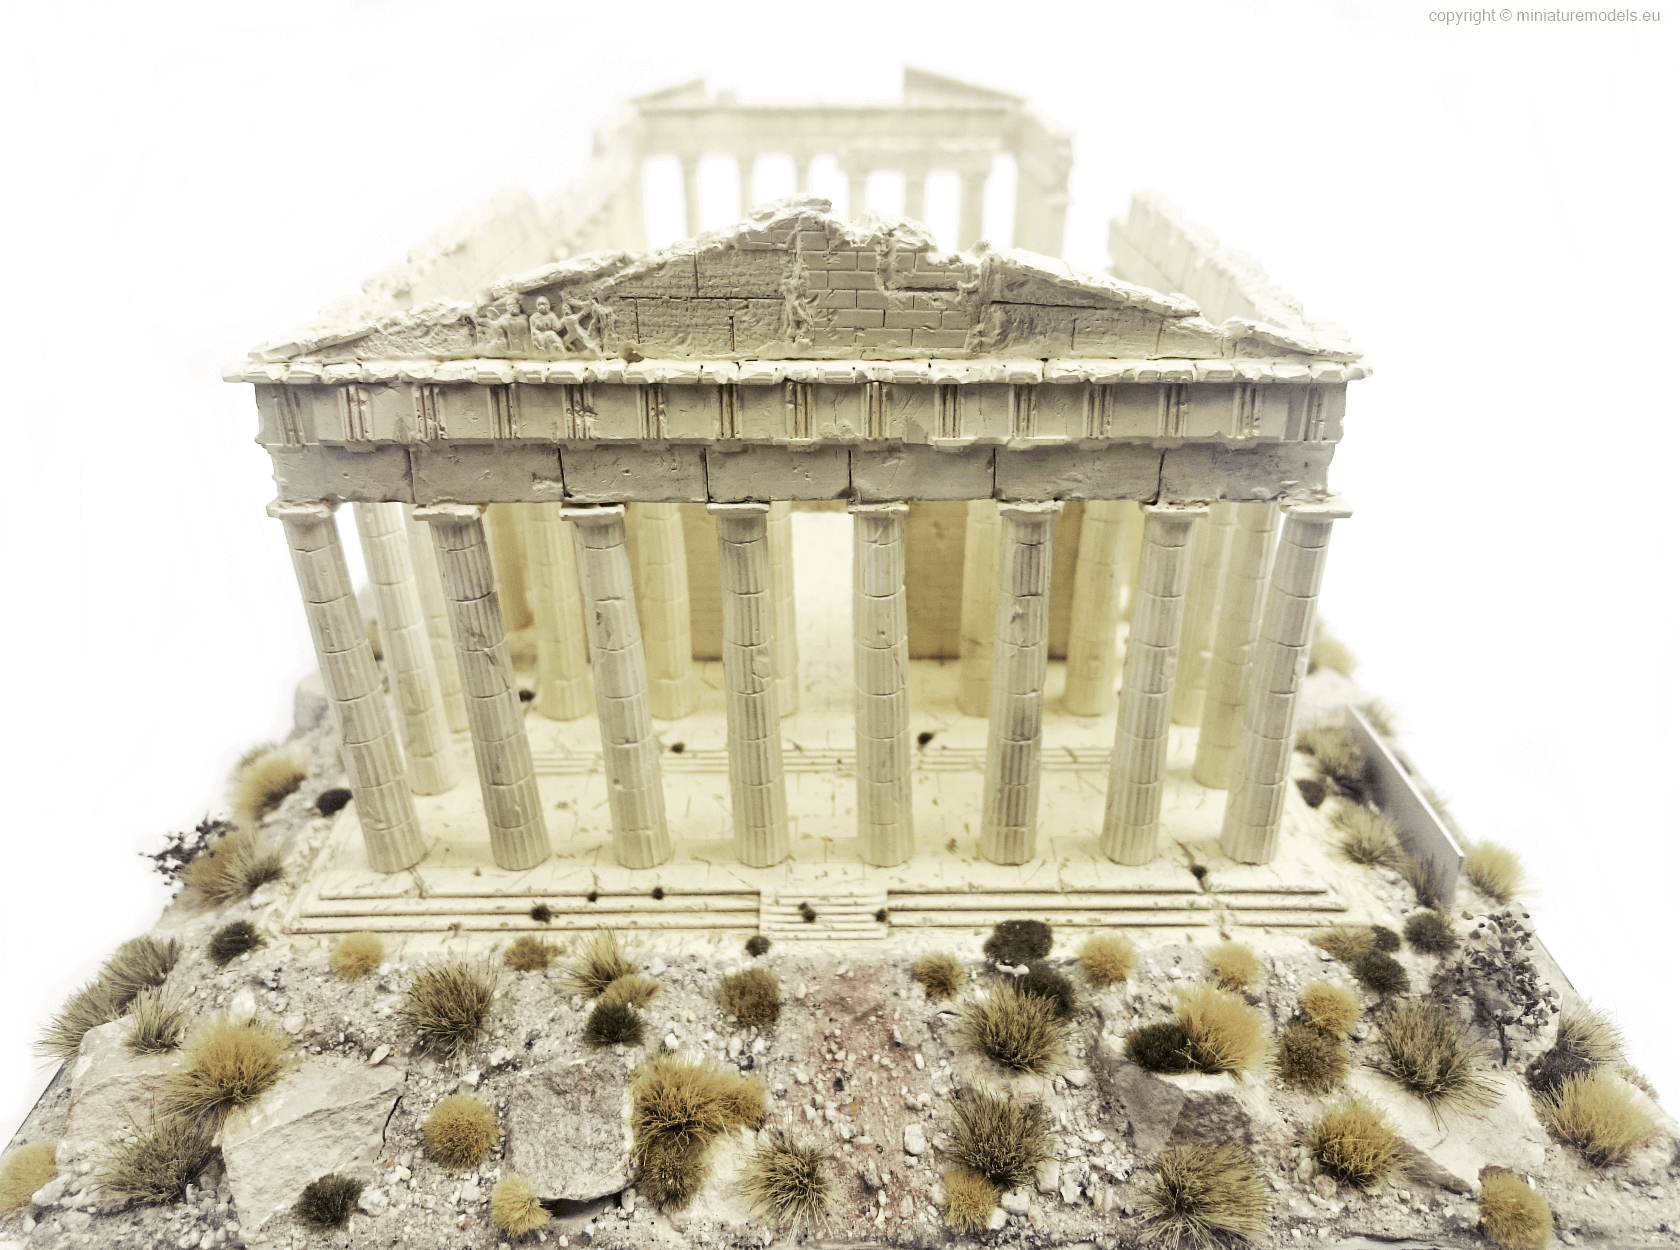 West view of the Parthenon model